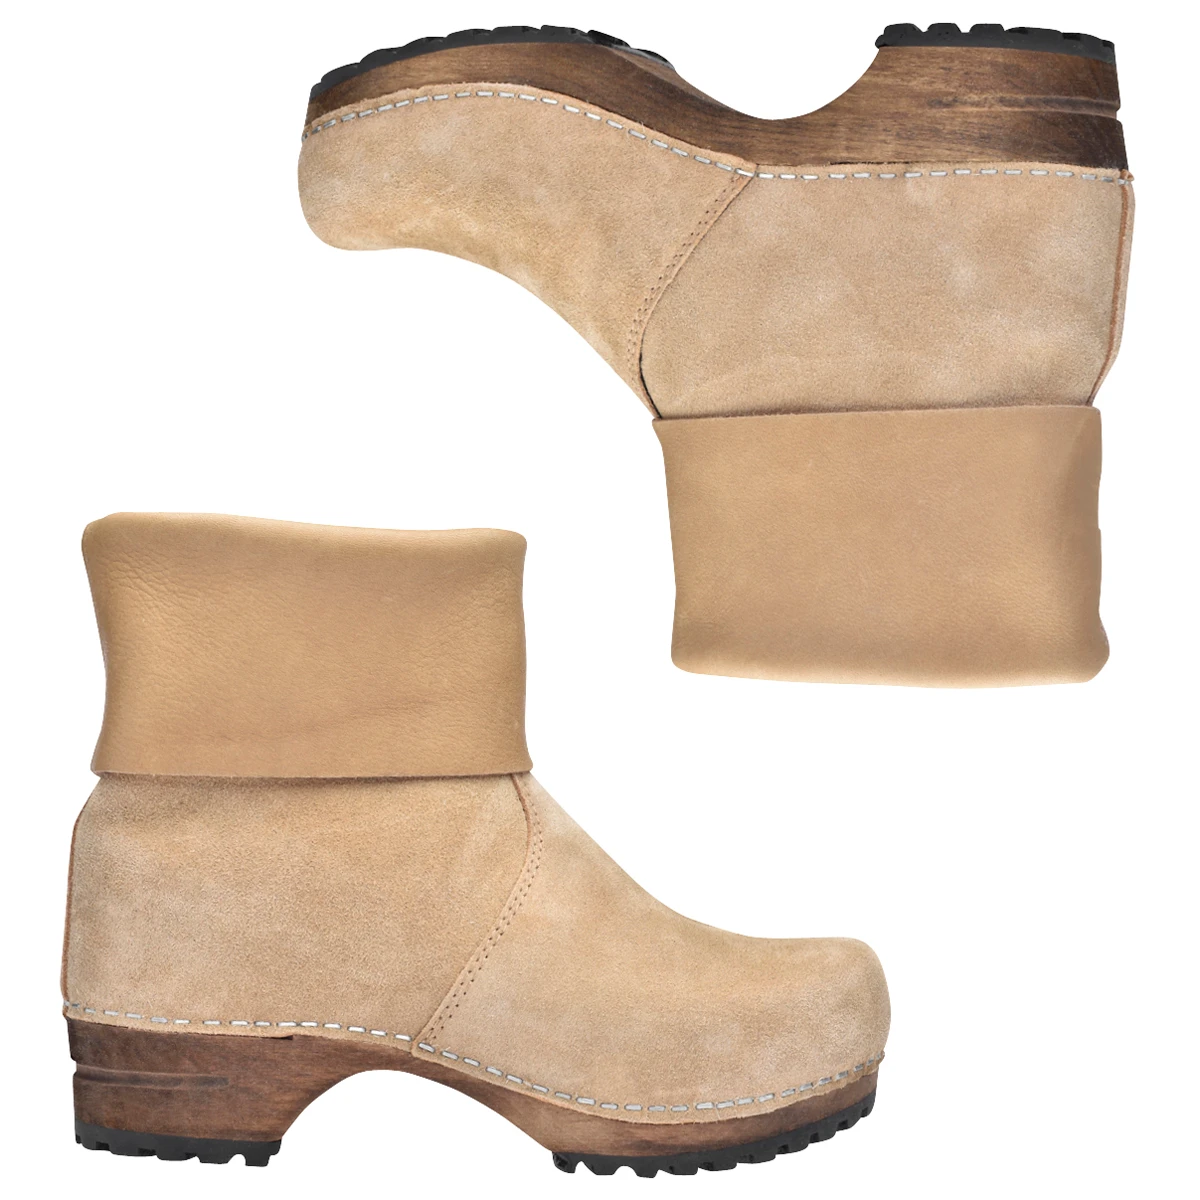 opgroeien zakdoek Vervagen Clogs boots from Sanita - buy our delicious clogs here